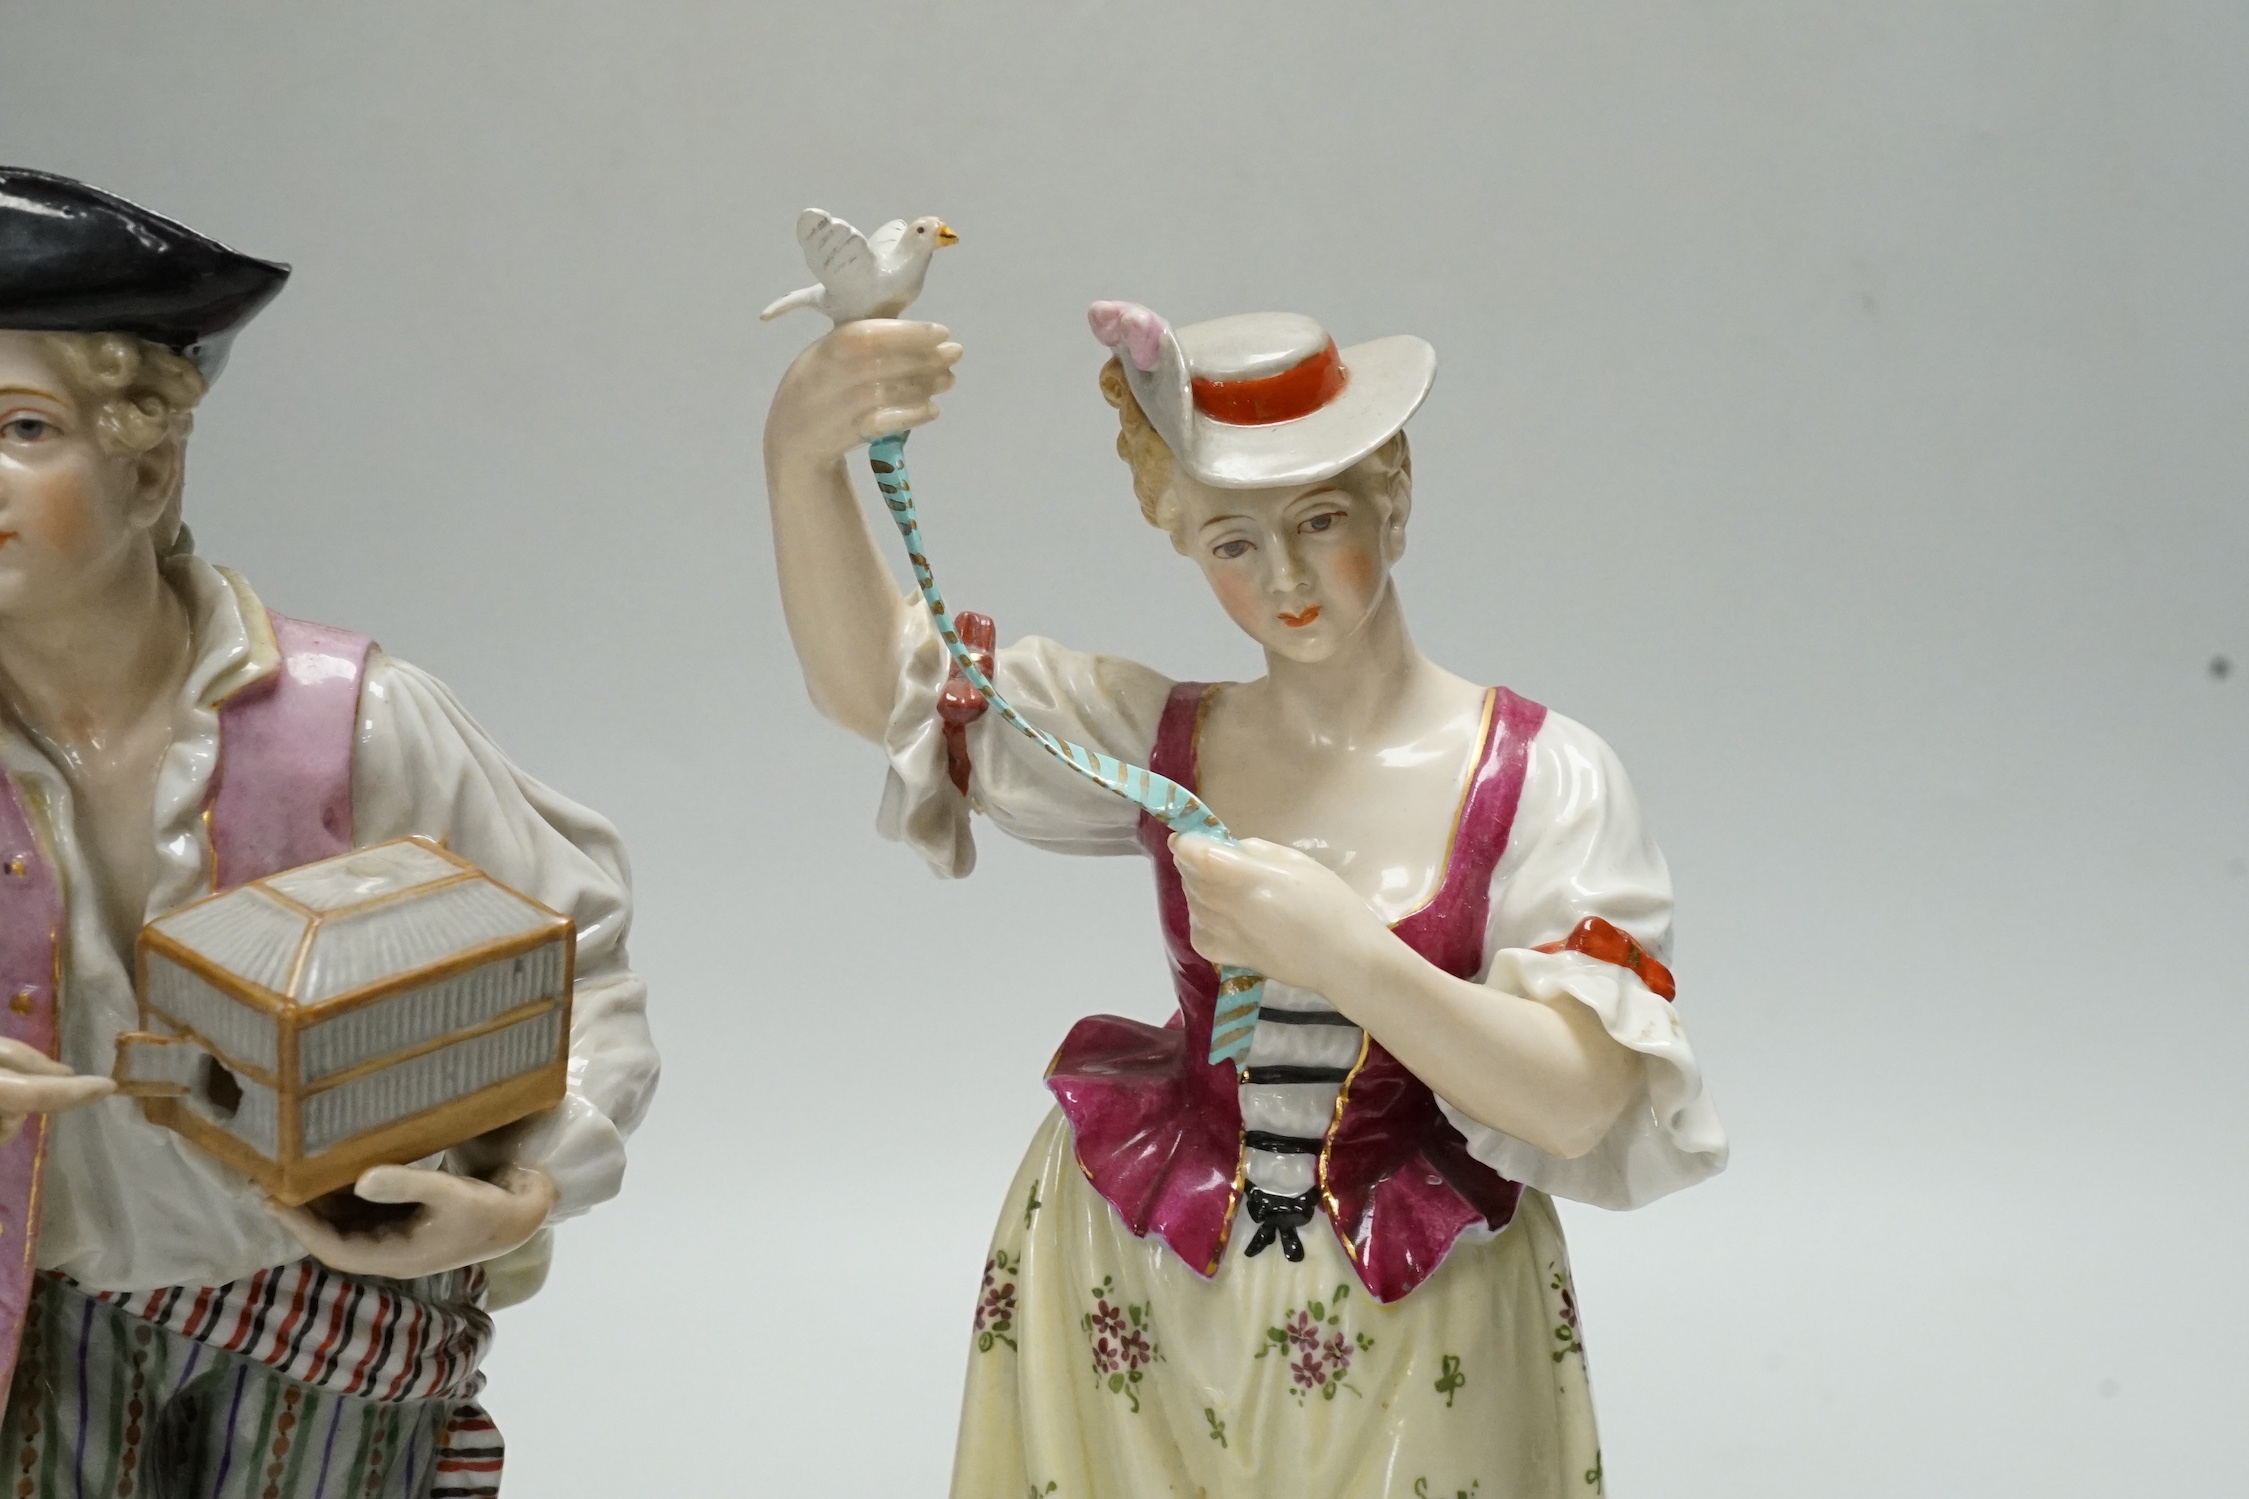 Two 19th century Ludwigsburg porcelain figures, 20cm